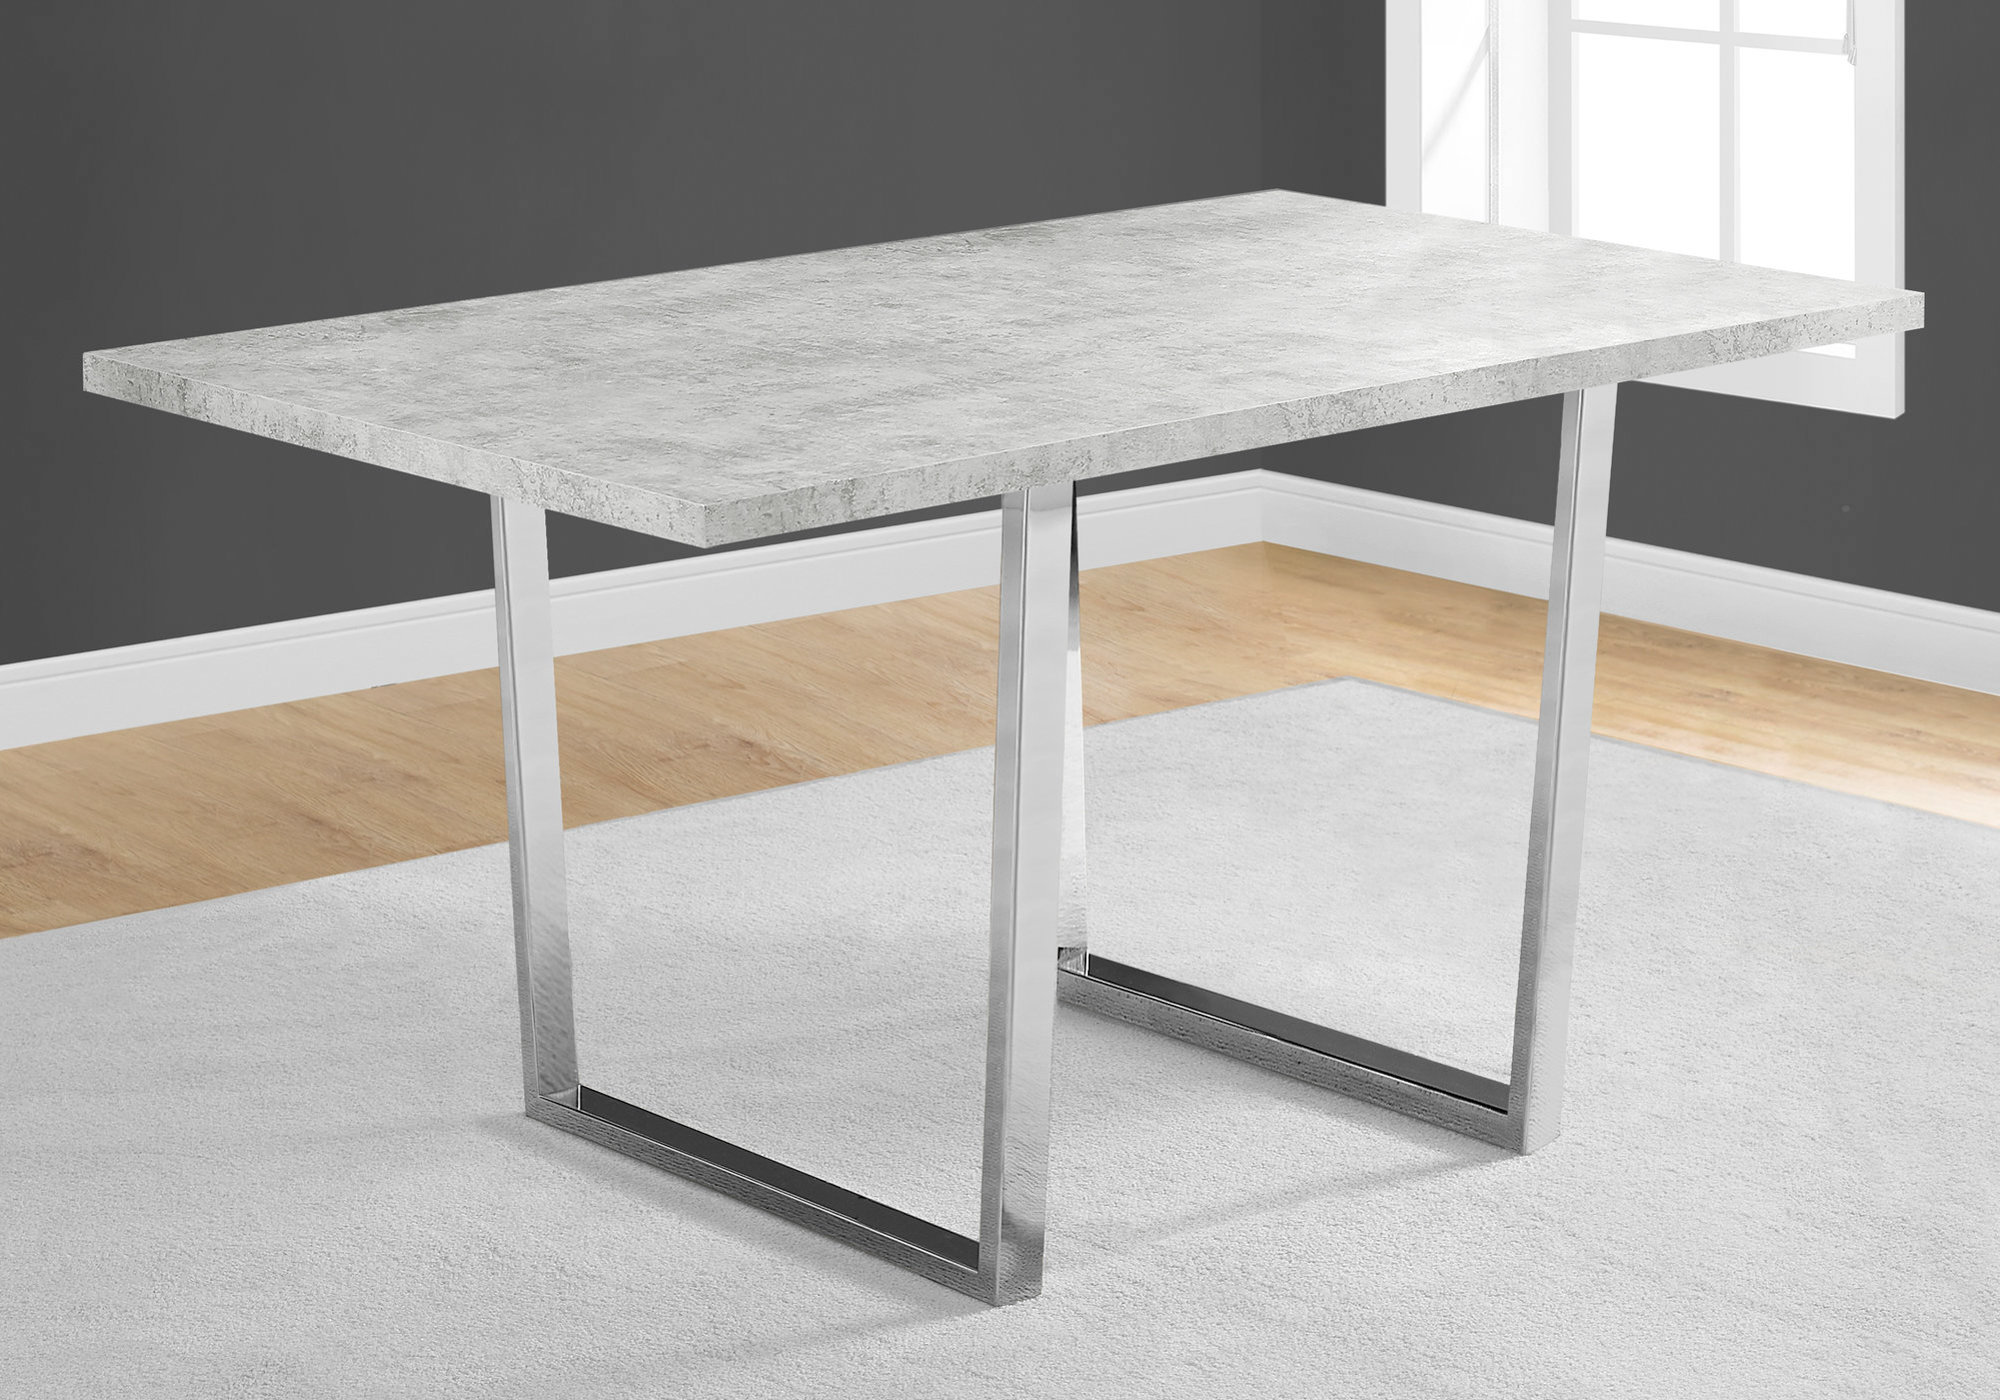 DINING TABLE - 36"X 60" / GREY CEMENT / CHROME METAL